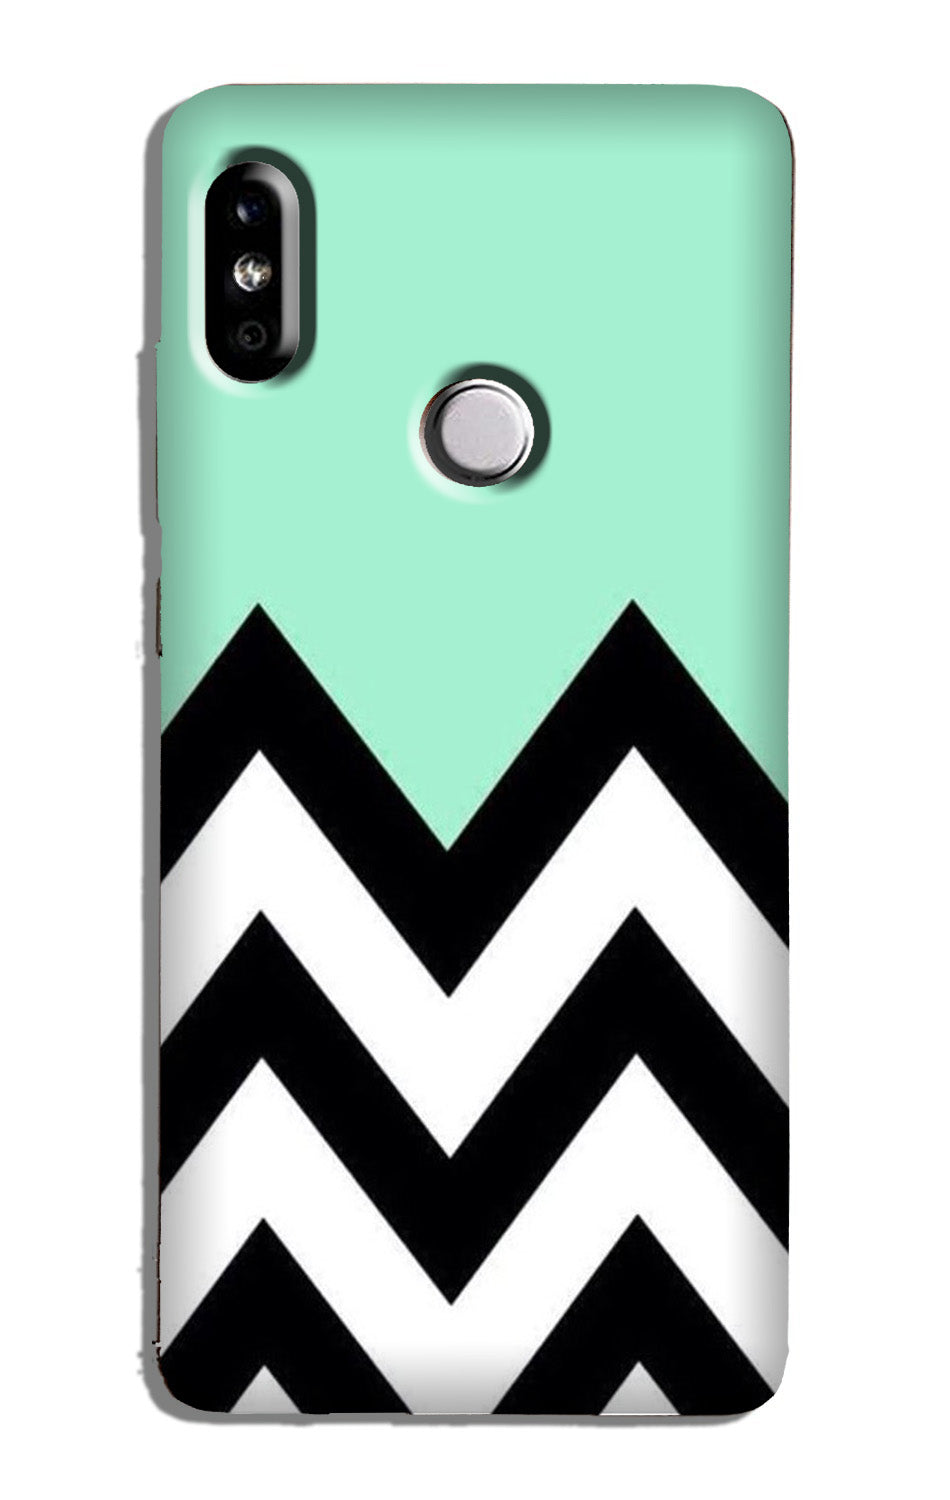 Pattern Case for Redmi Note 6 Pro